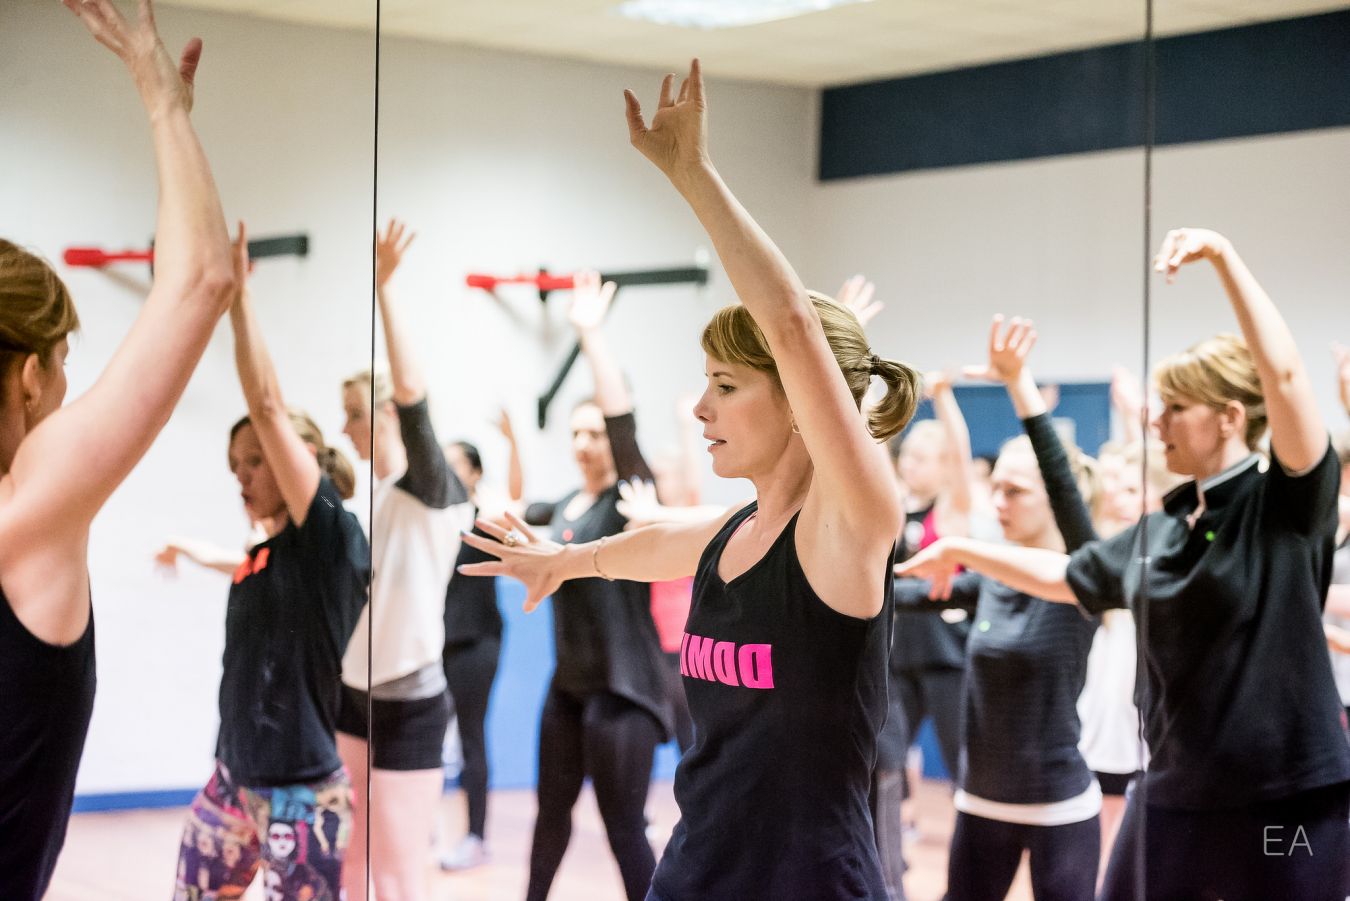 Darcey Bussell took a break from her Strictly Come Dancing judging duties to put Kingston University students through their paces during  an hour-long dance aerobic workout.